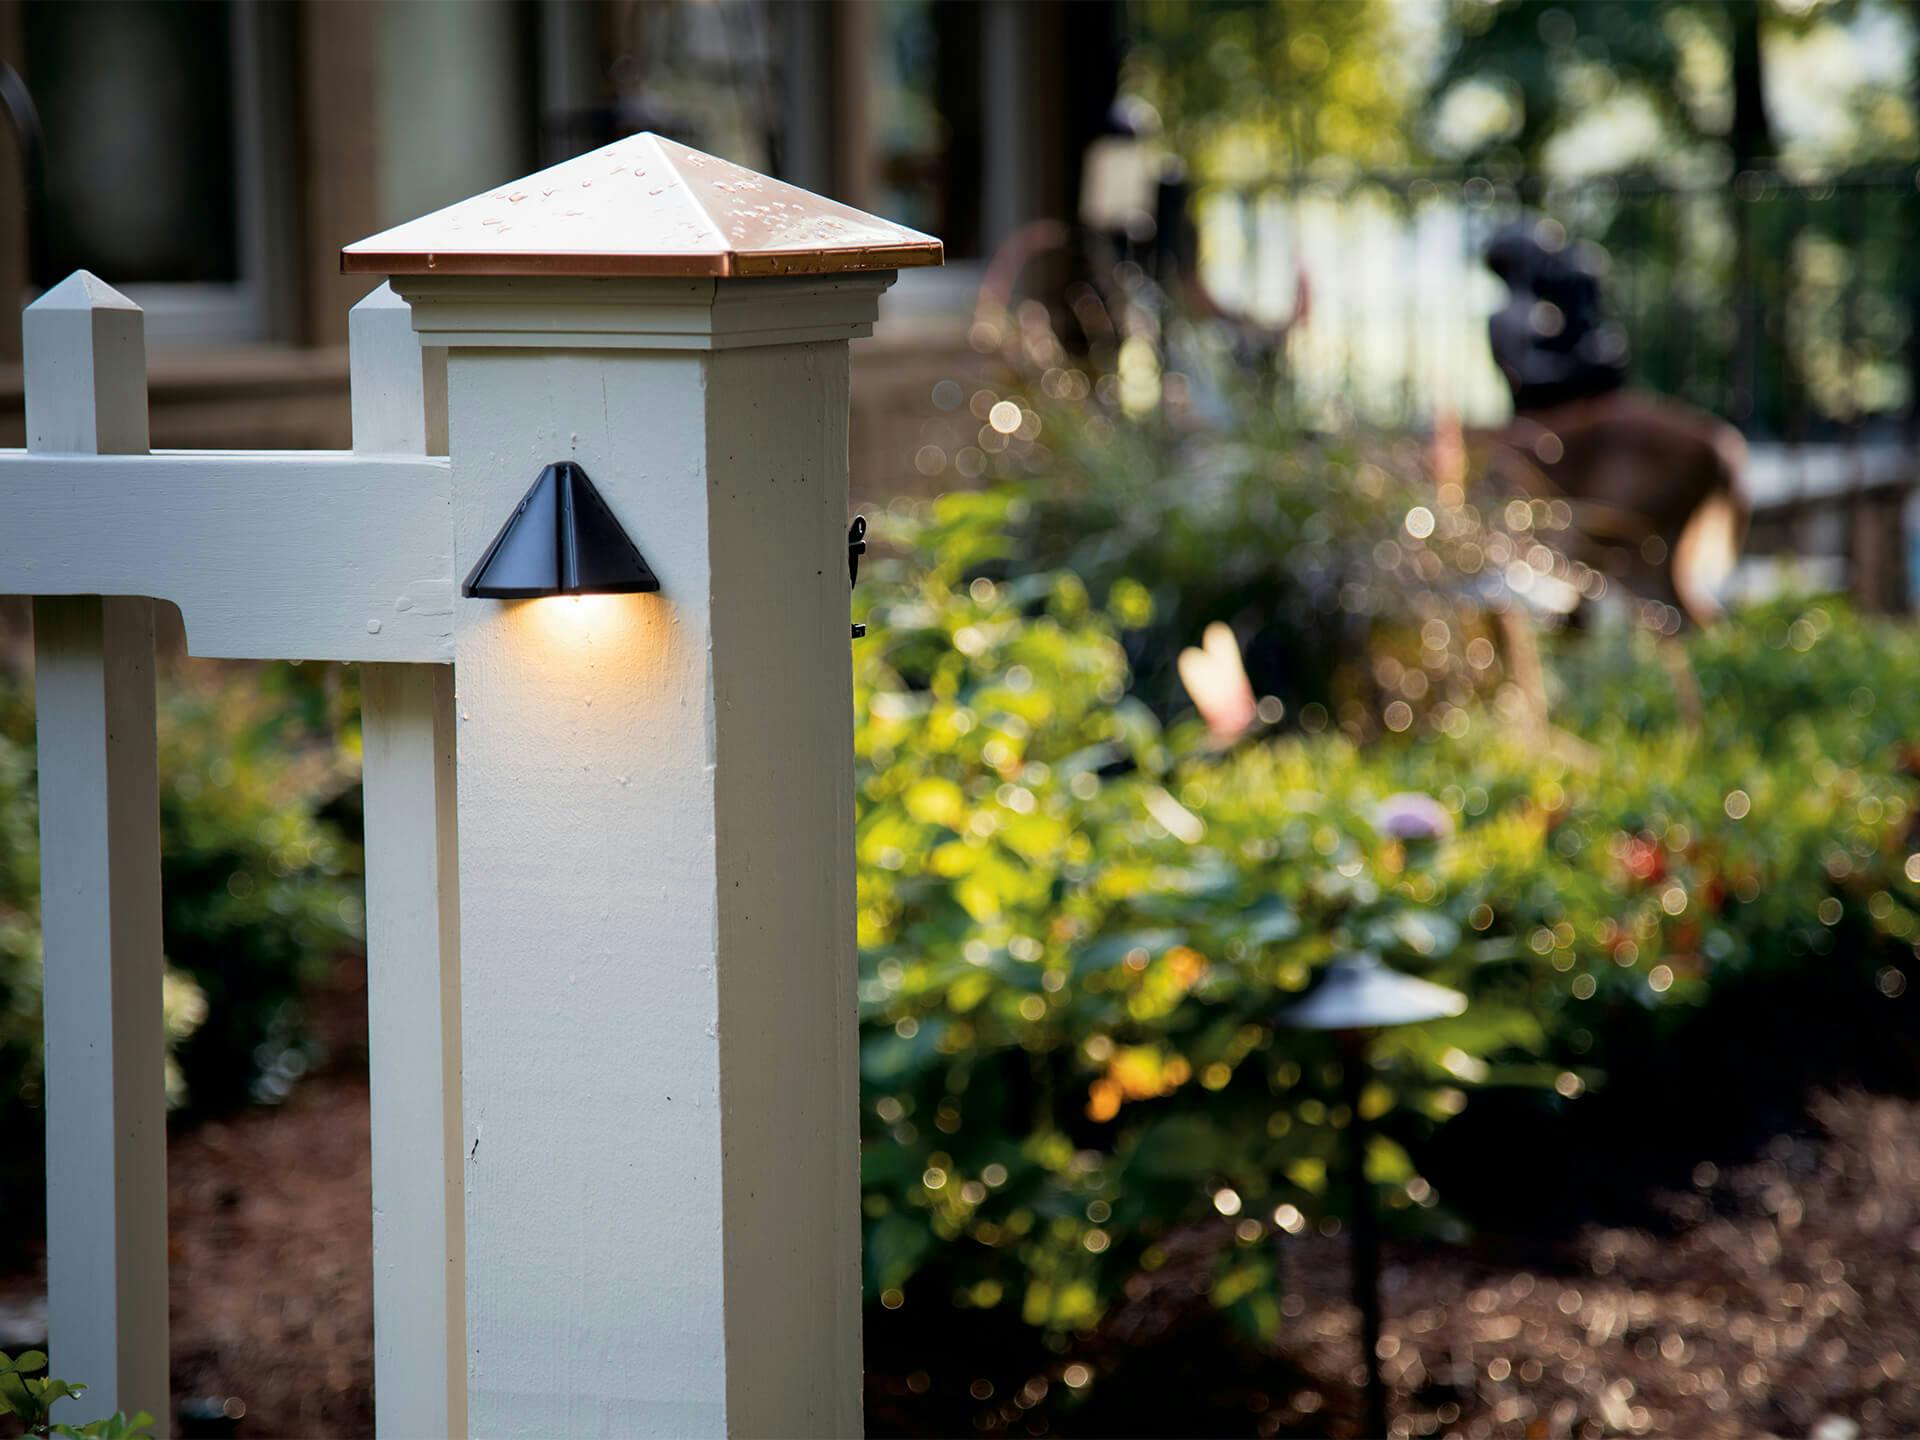 12 Volt Deck Light mounted on fence post outside a garden